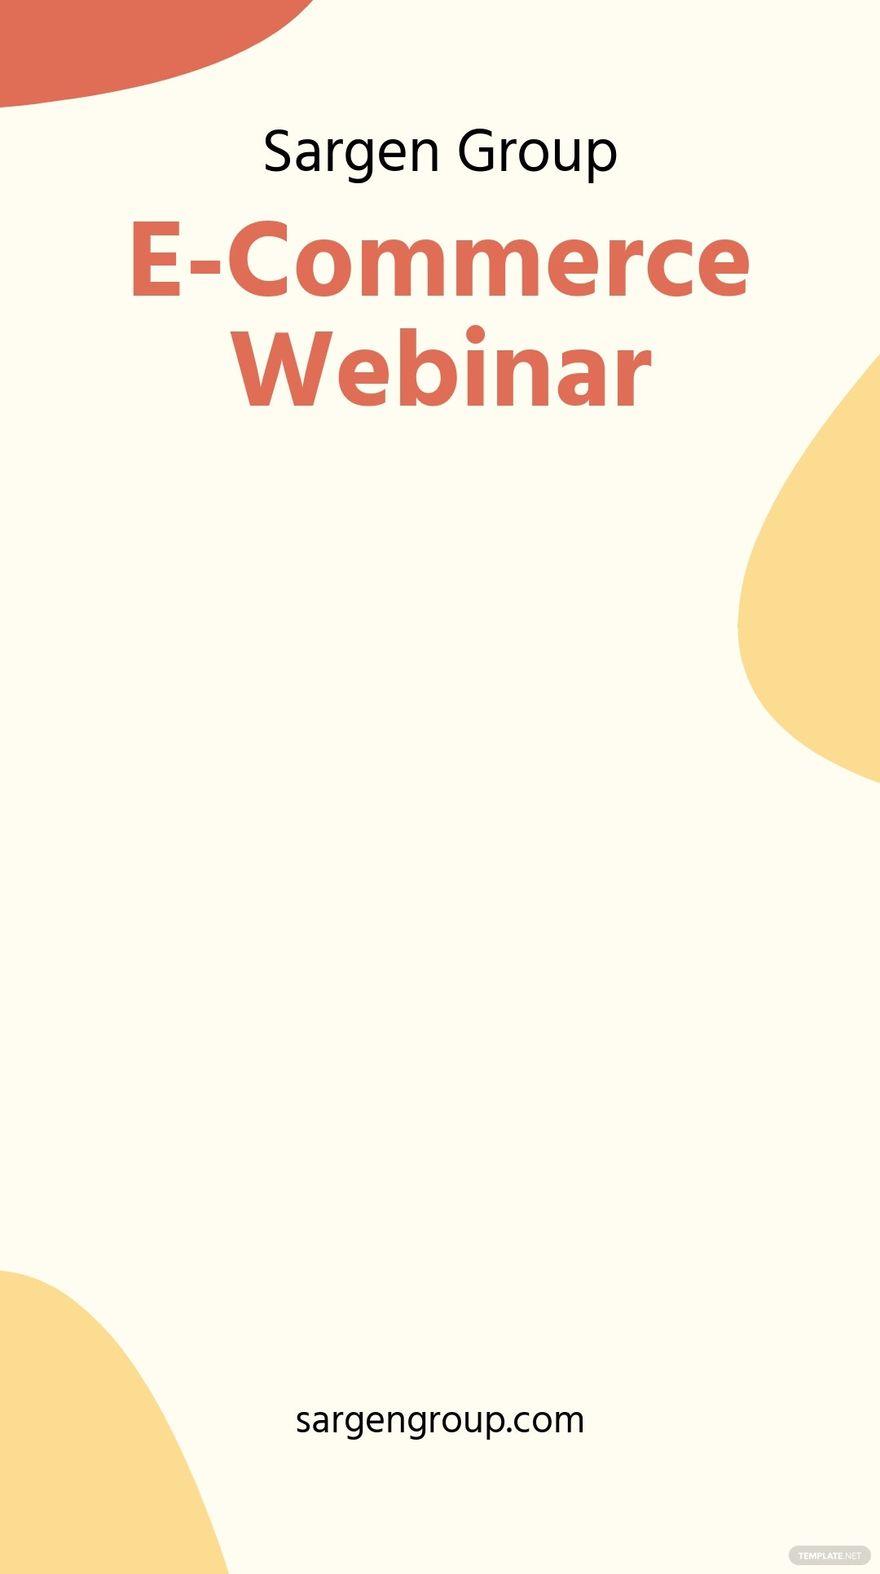 Free Webinar Promotion Snapchat Geofilter Template